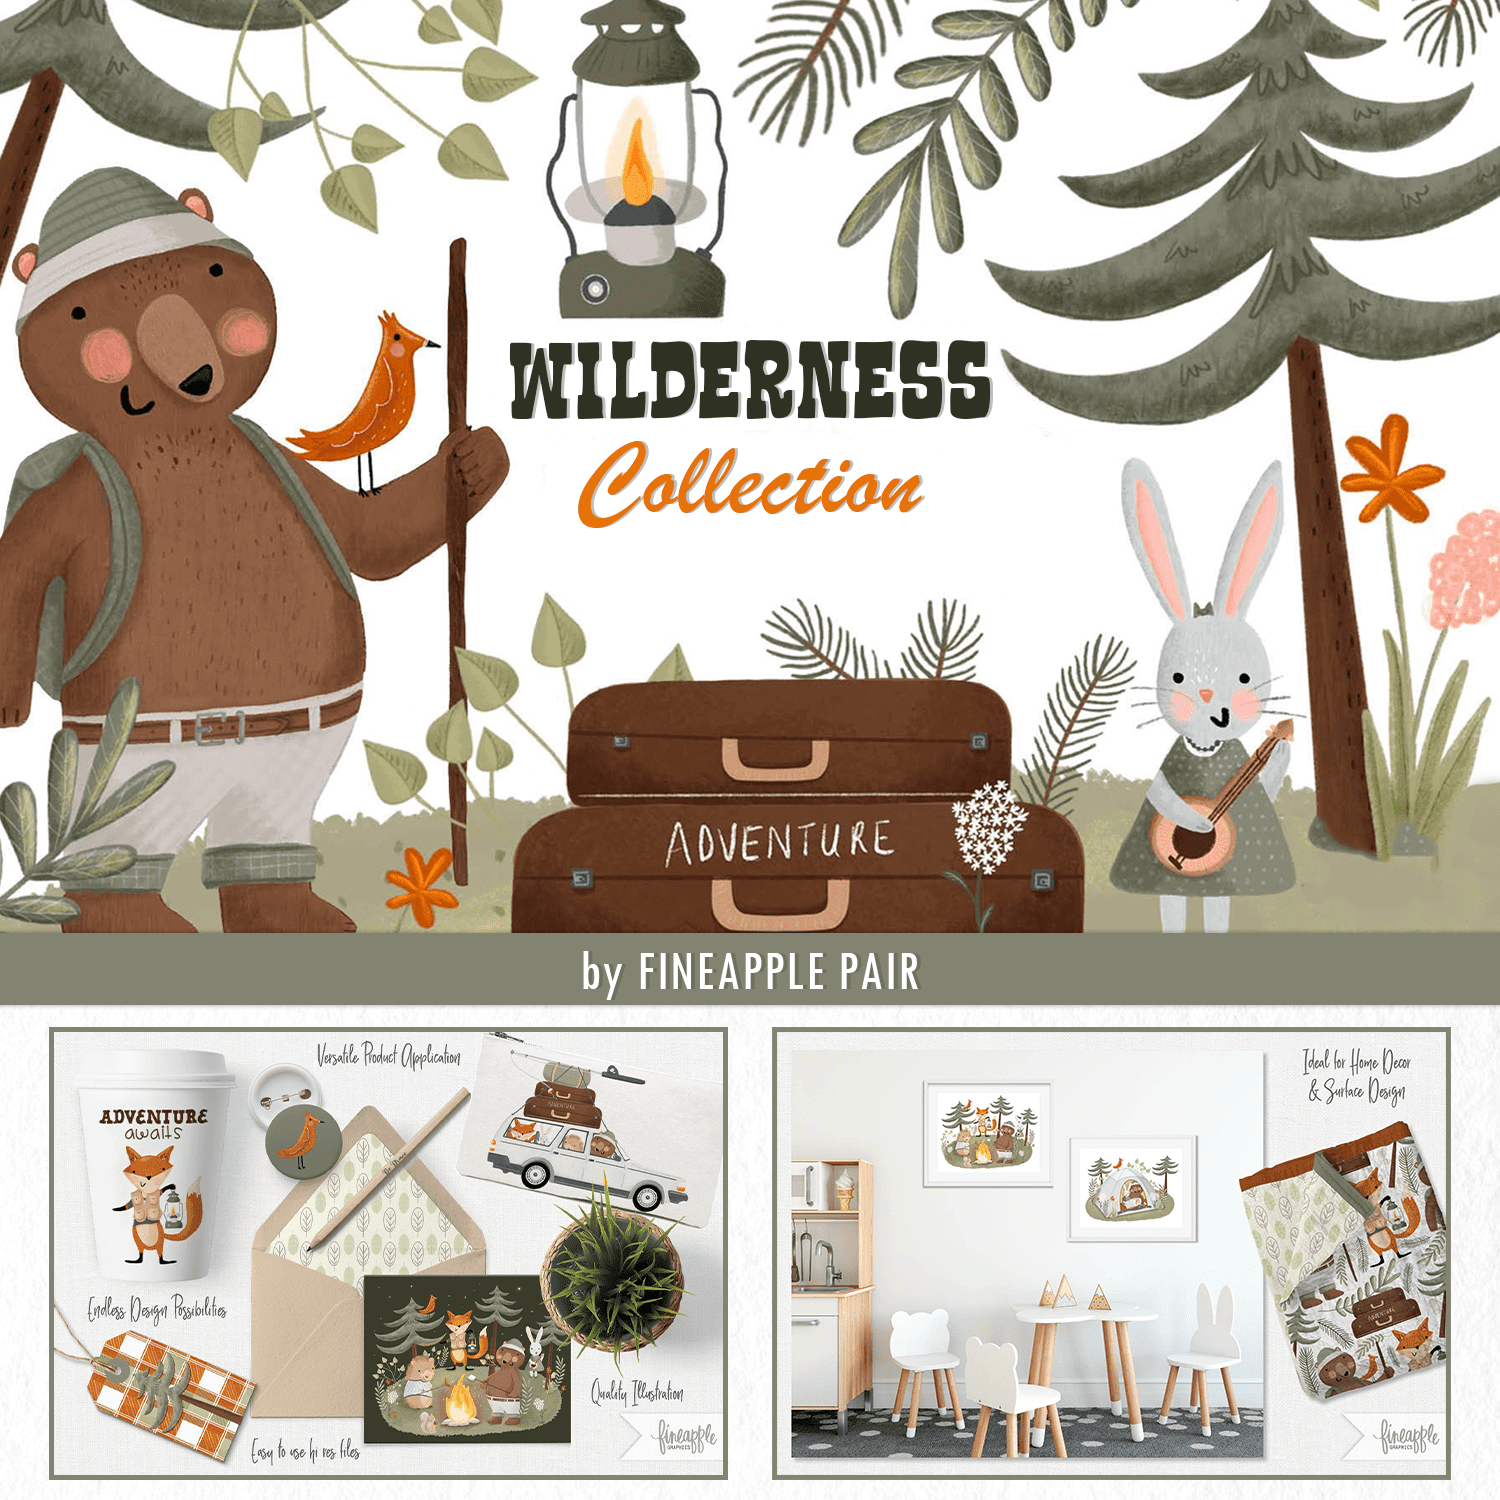 Wilderness Collection cover.